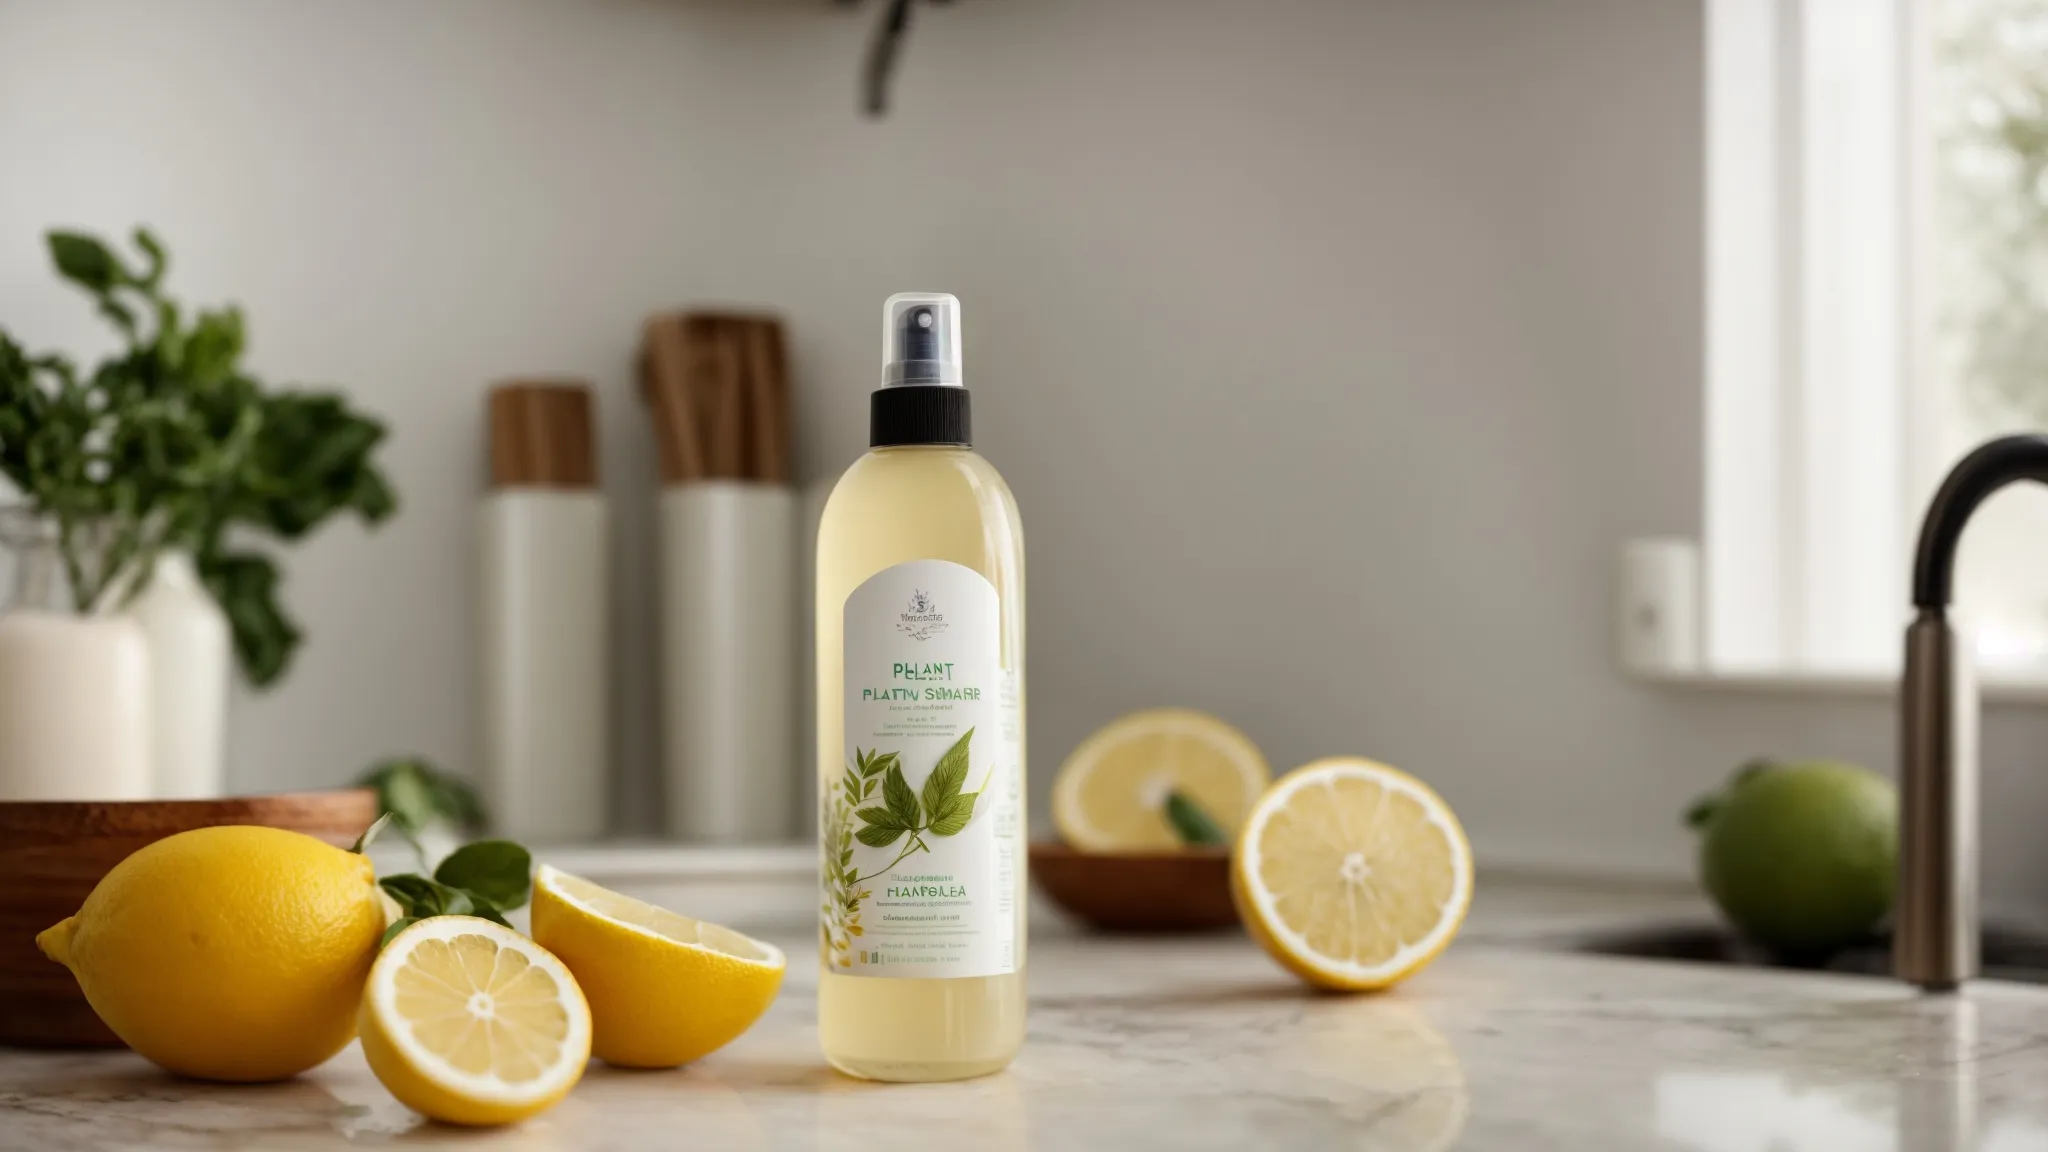 a bottle of plant-based cleaning spray next to a pile of lemons on a kitchen counter.